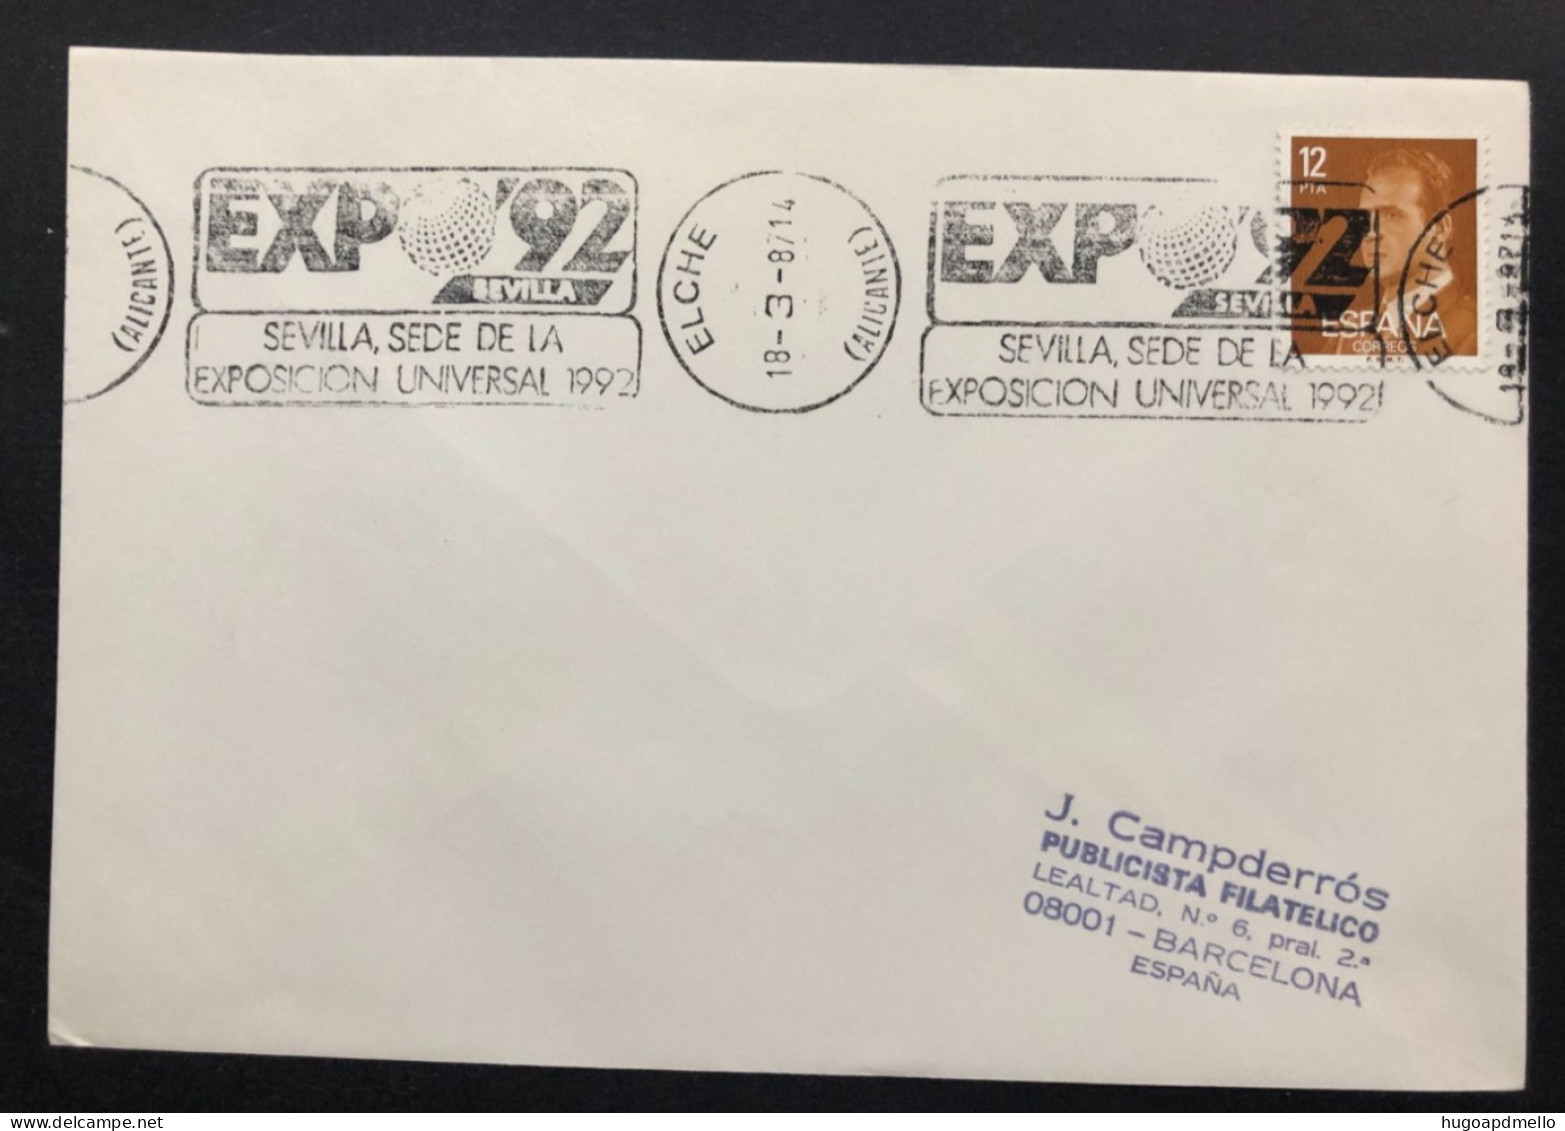 SPAIN, Cover With Special Cancellation « EXPO '92 », « ELCHE Postmark », 1987 - 1992 – Séville (Espagne)